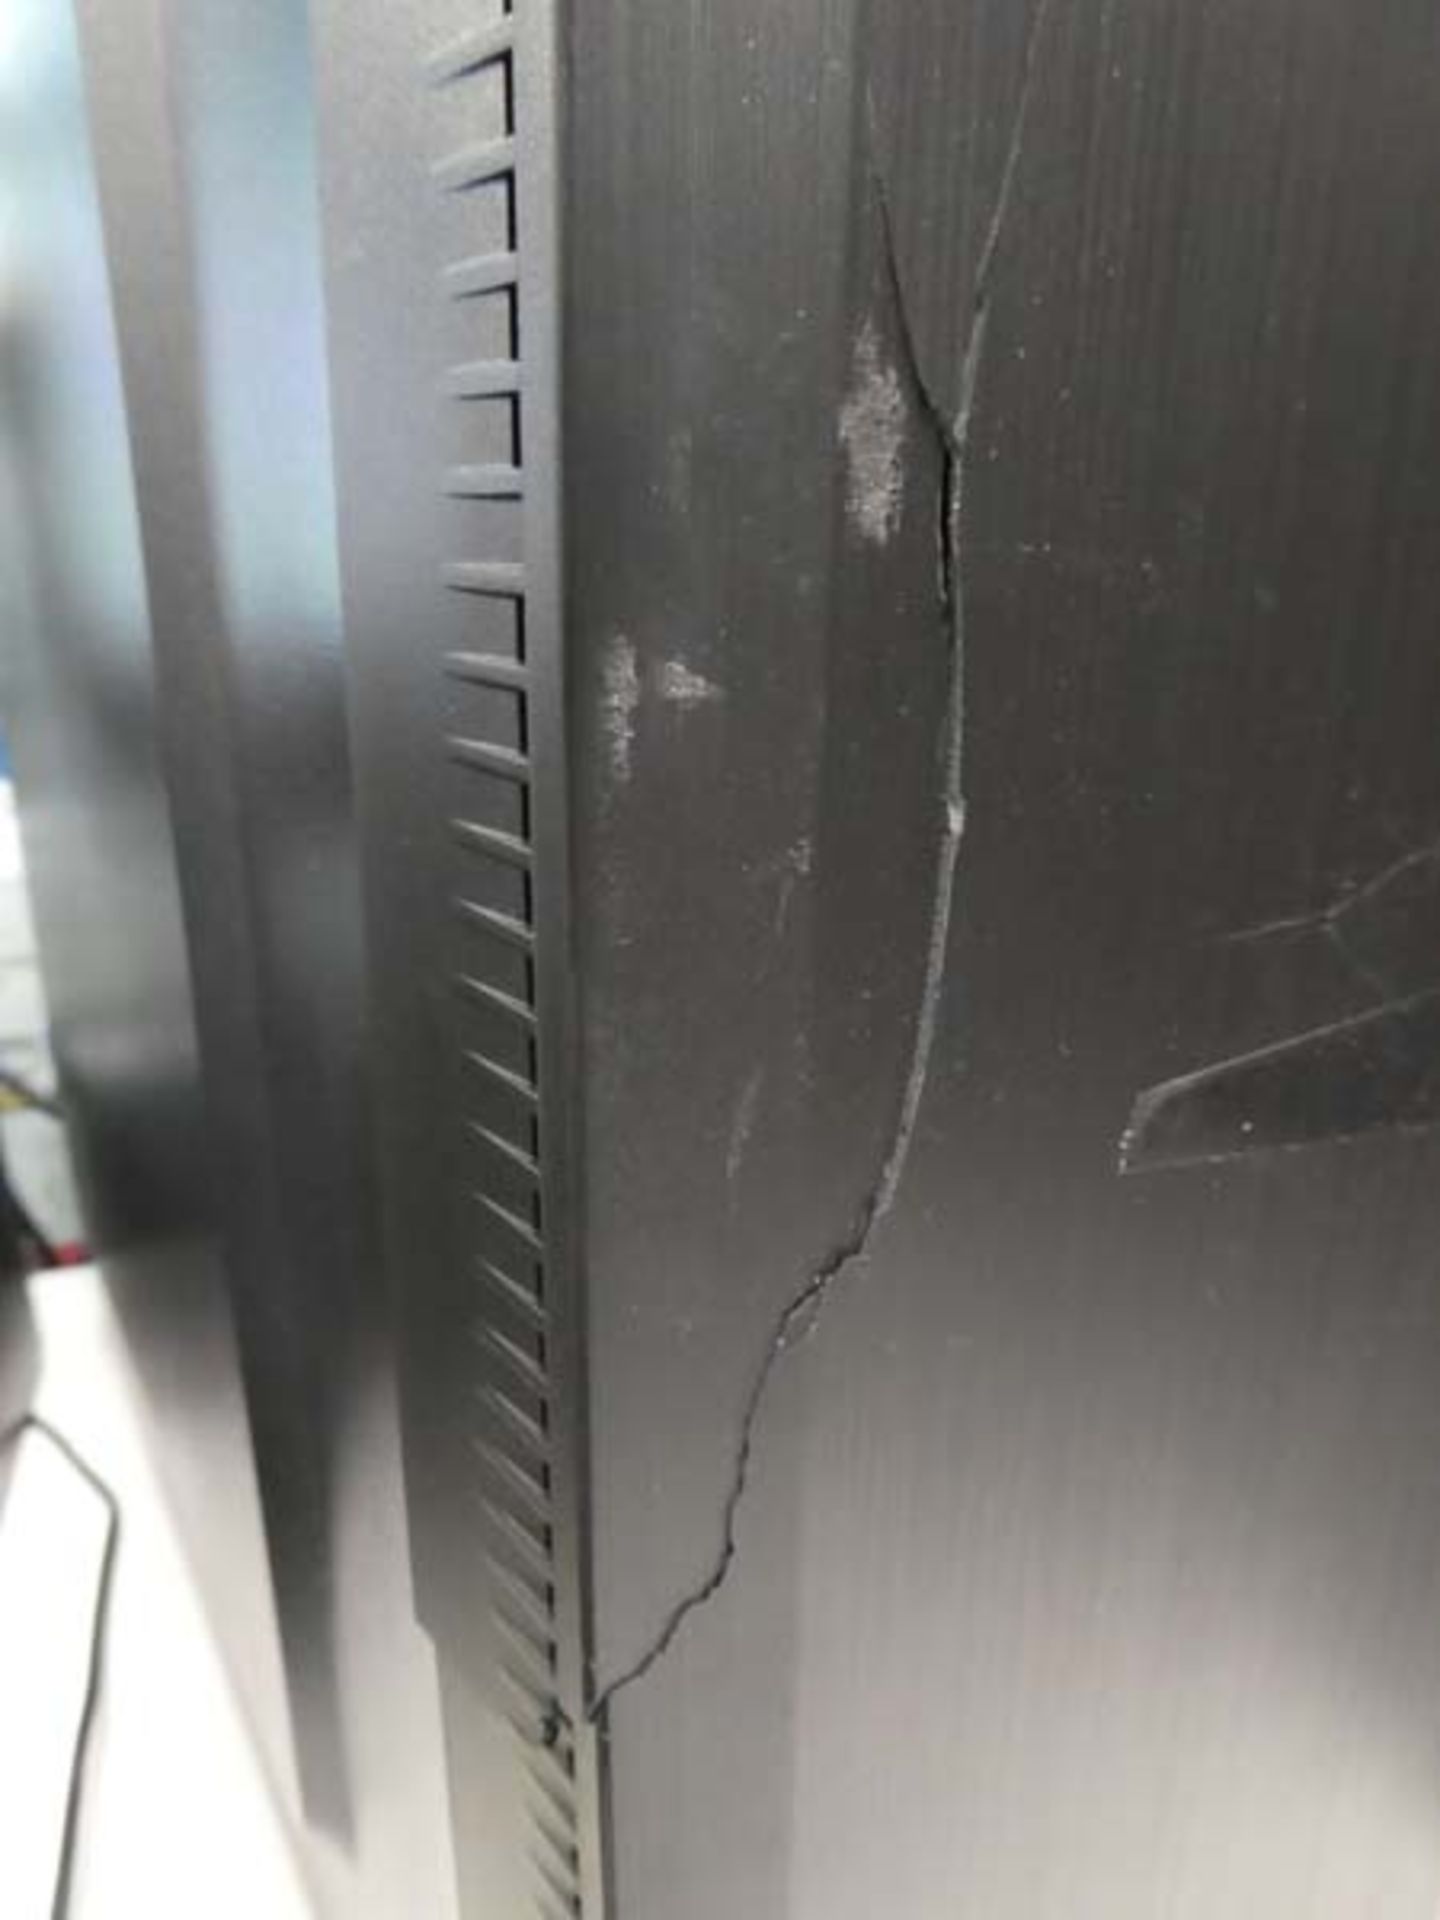 Desktop computer with damaged case (no hdd, sold for parts) - Image 2 of 2